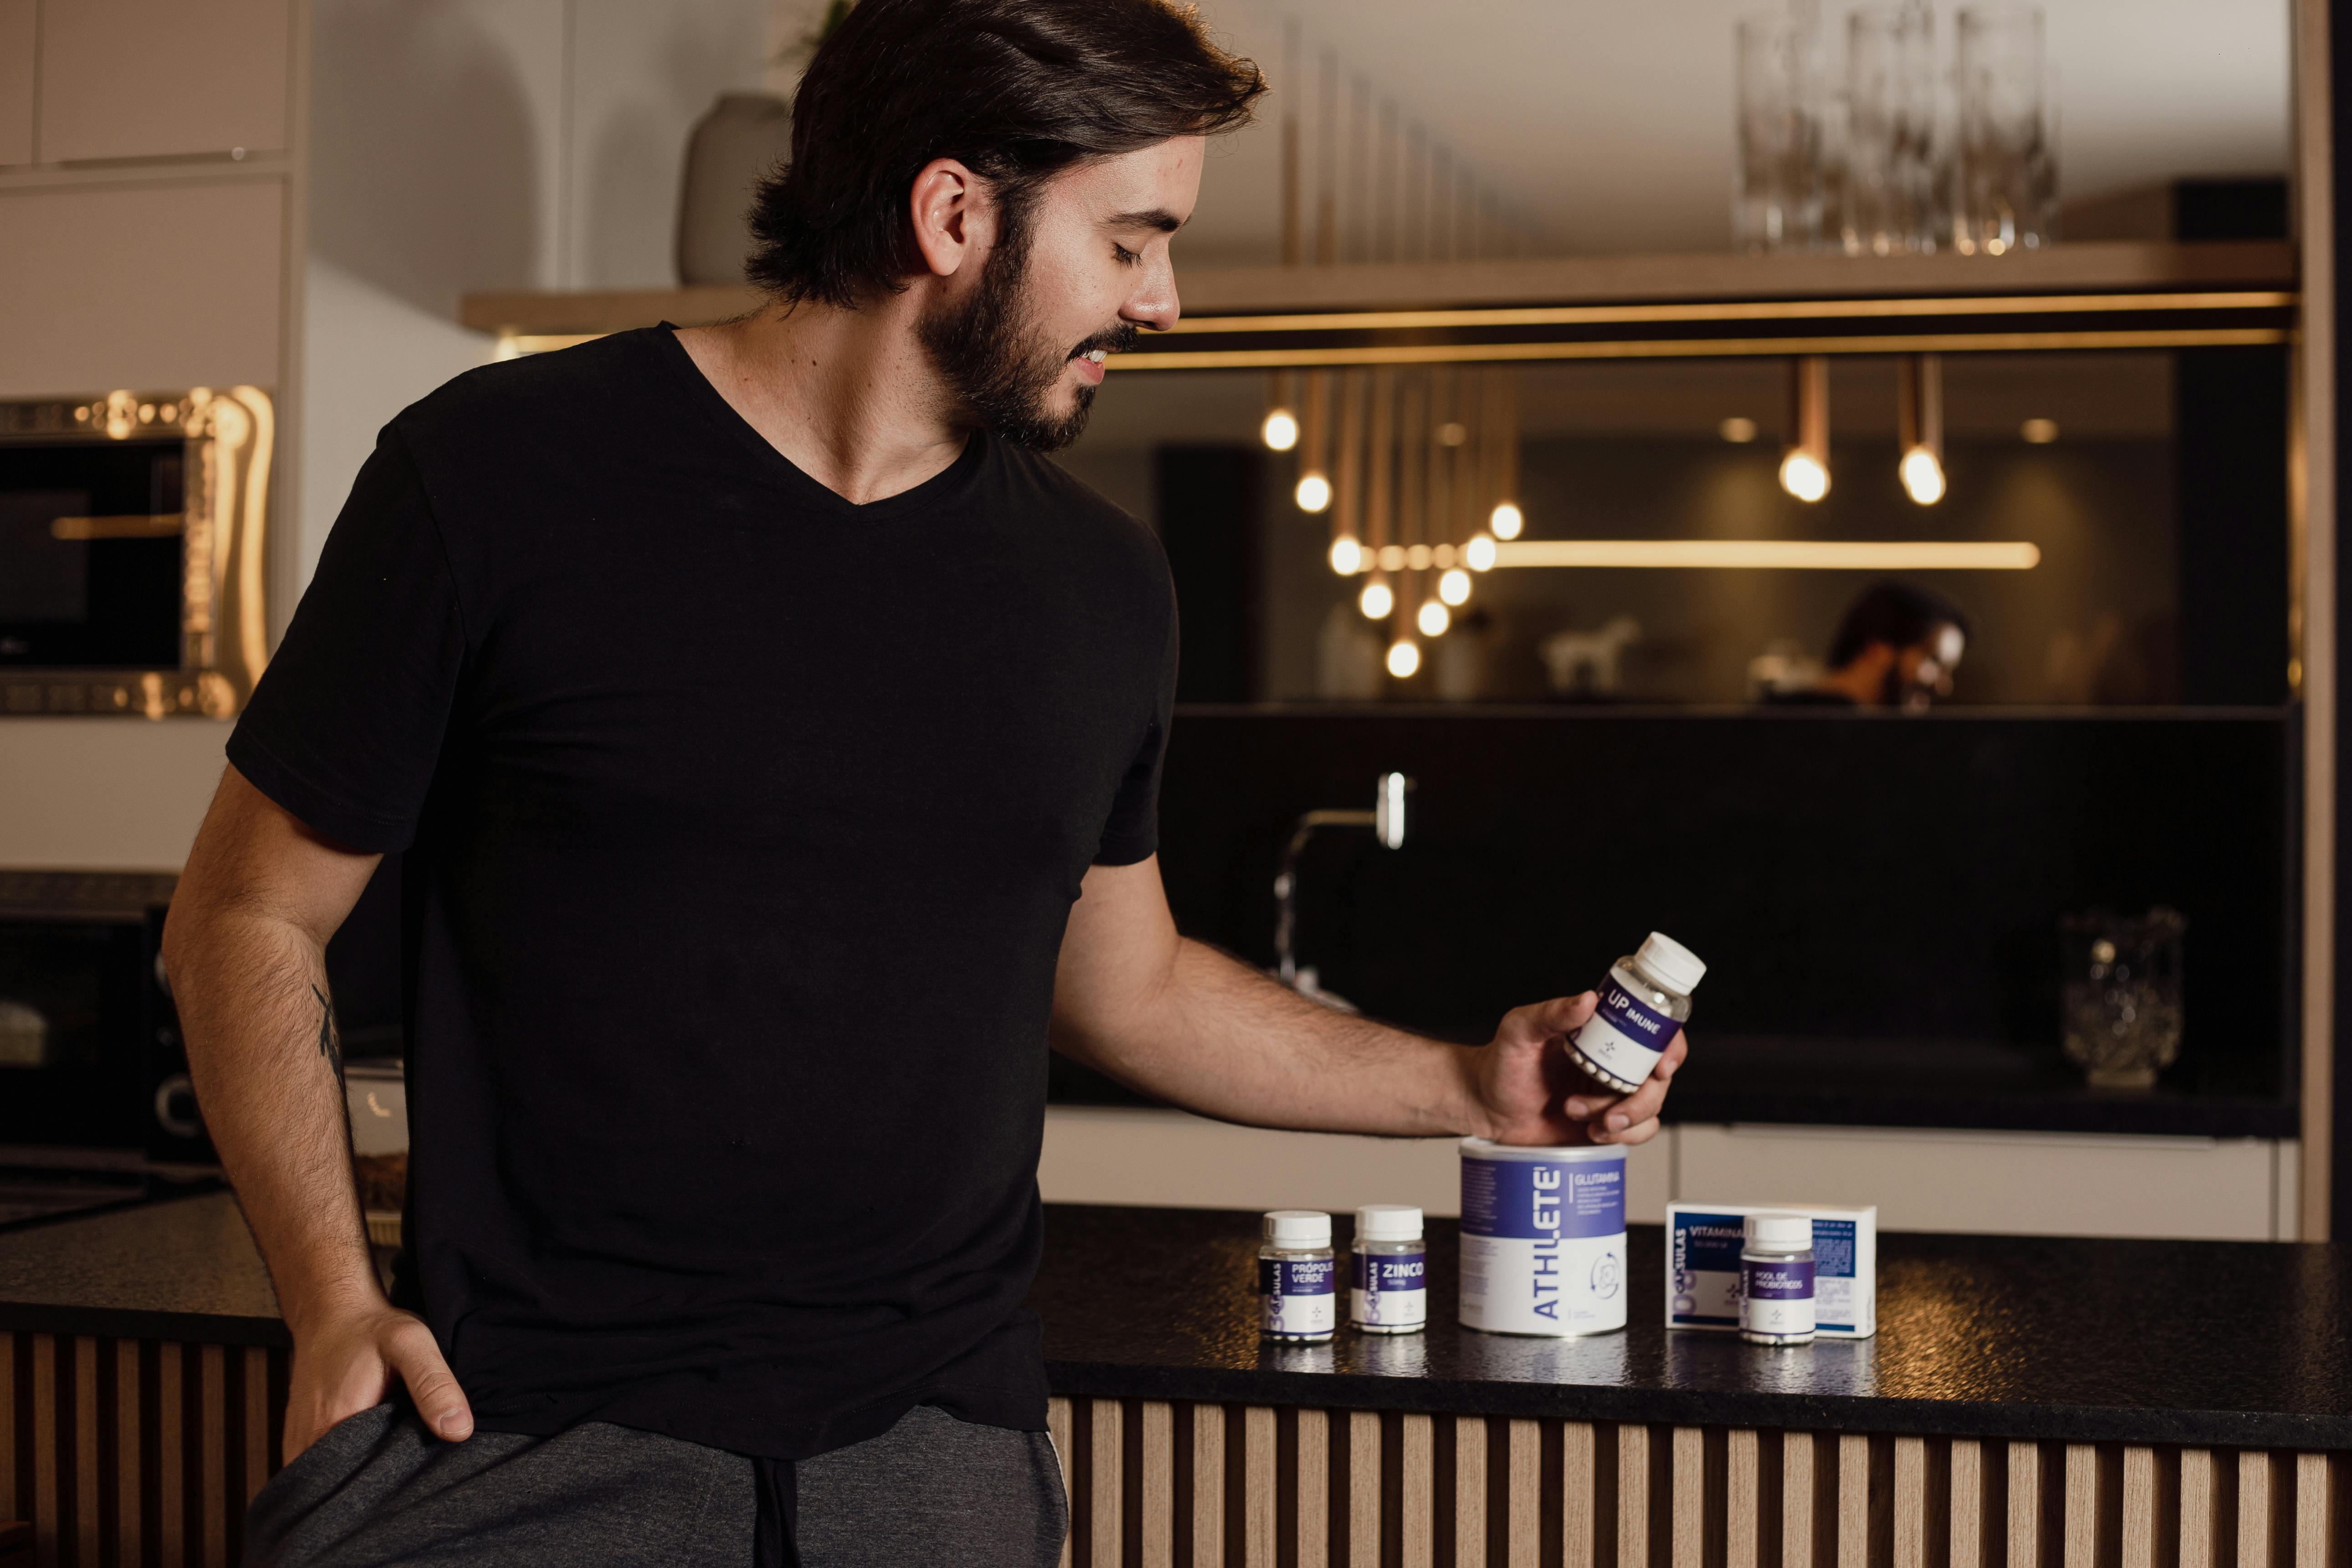 a man in black shirt looking at the bottle of supplement he is holding